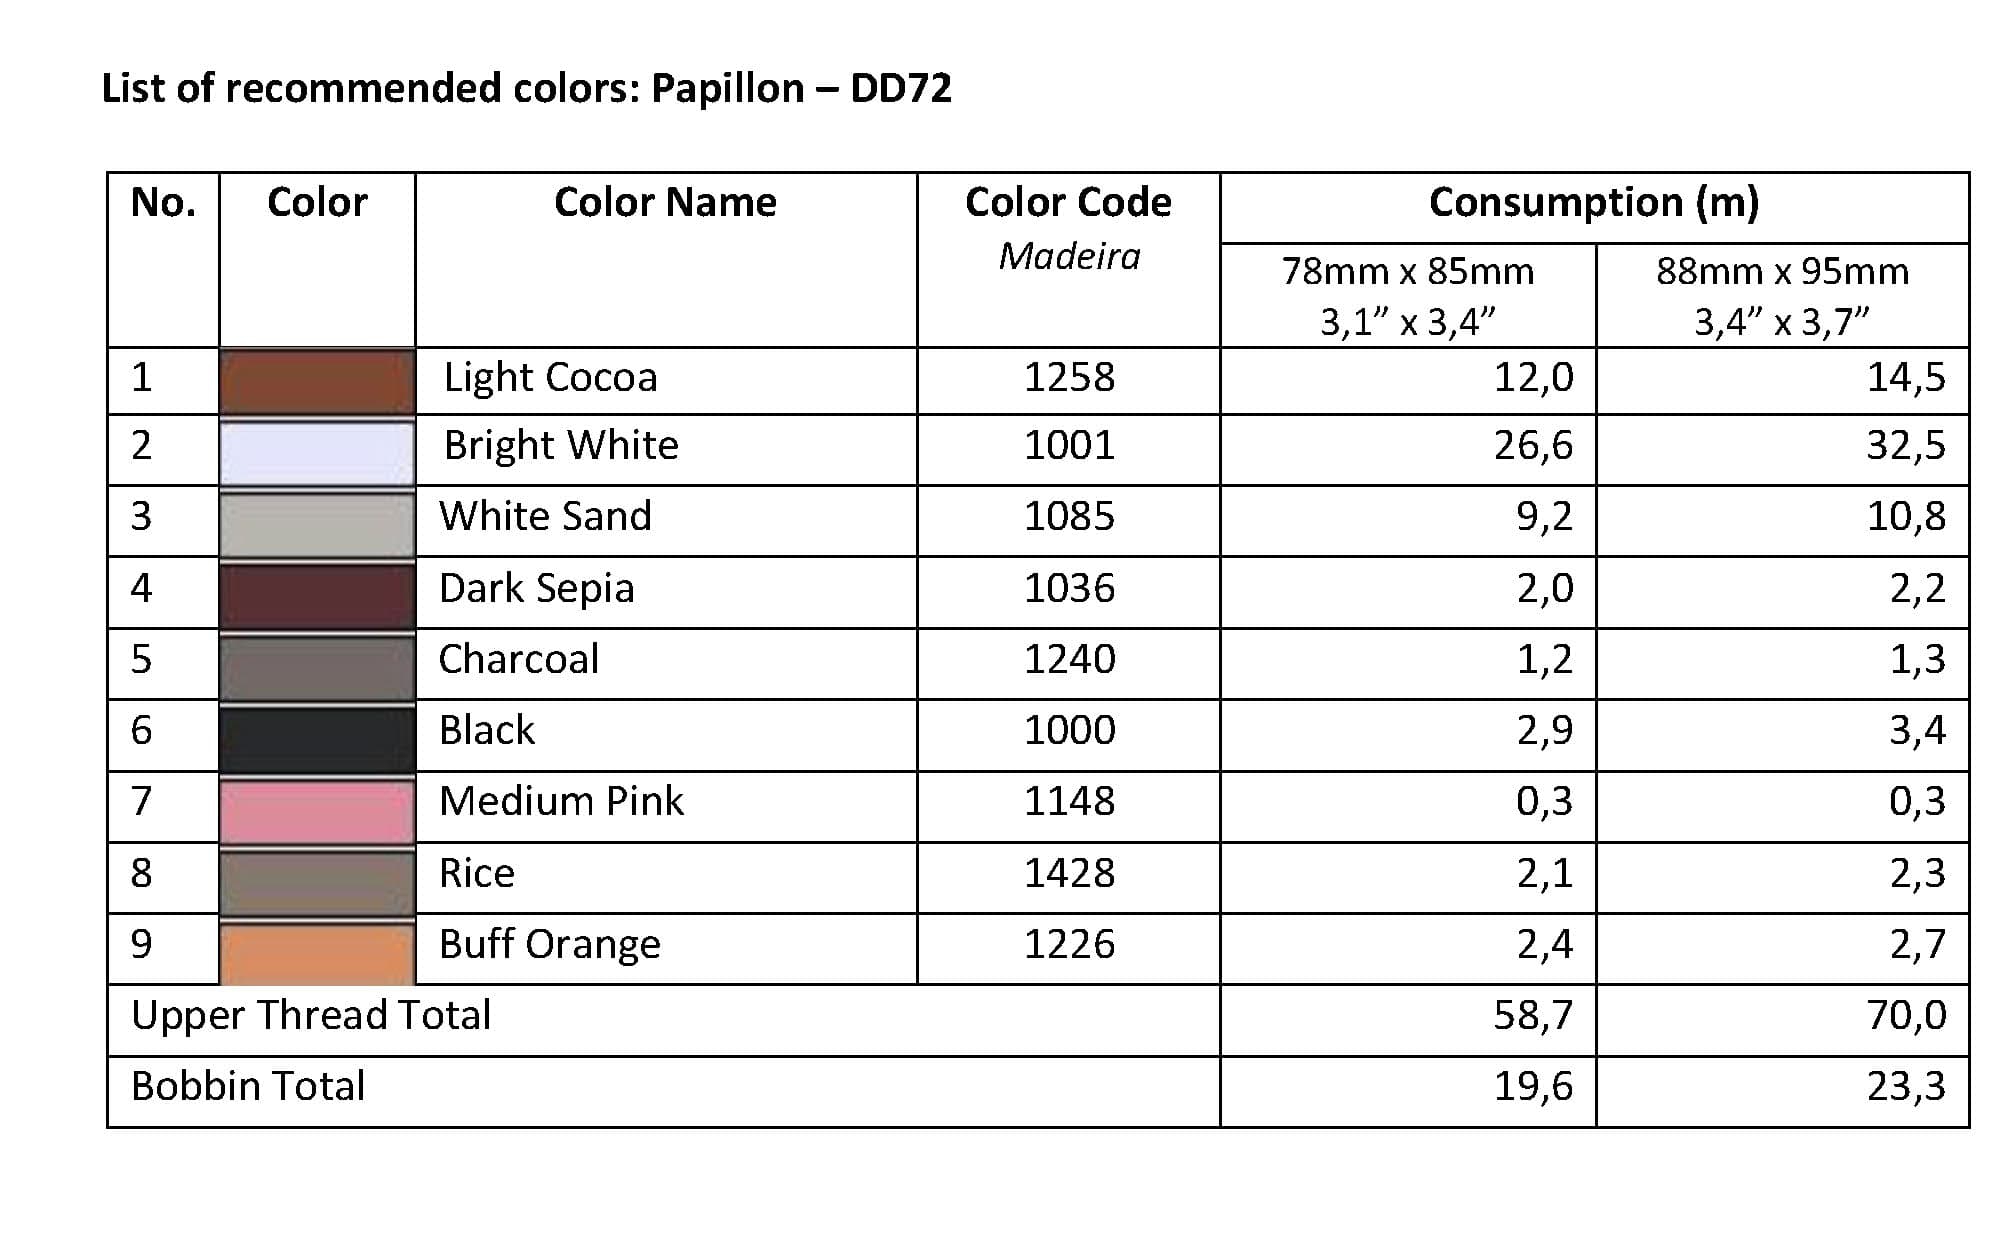 List of Recommended Colors -  Papillon DD72